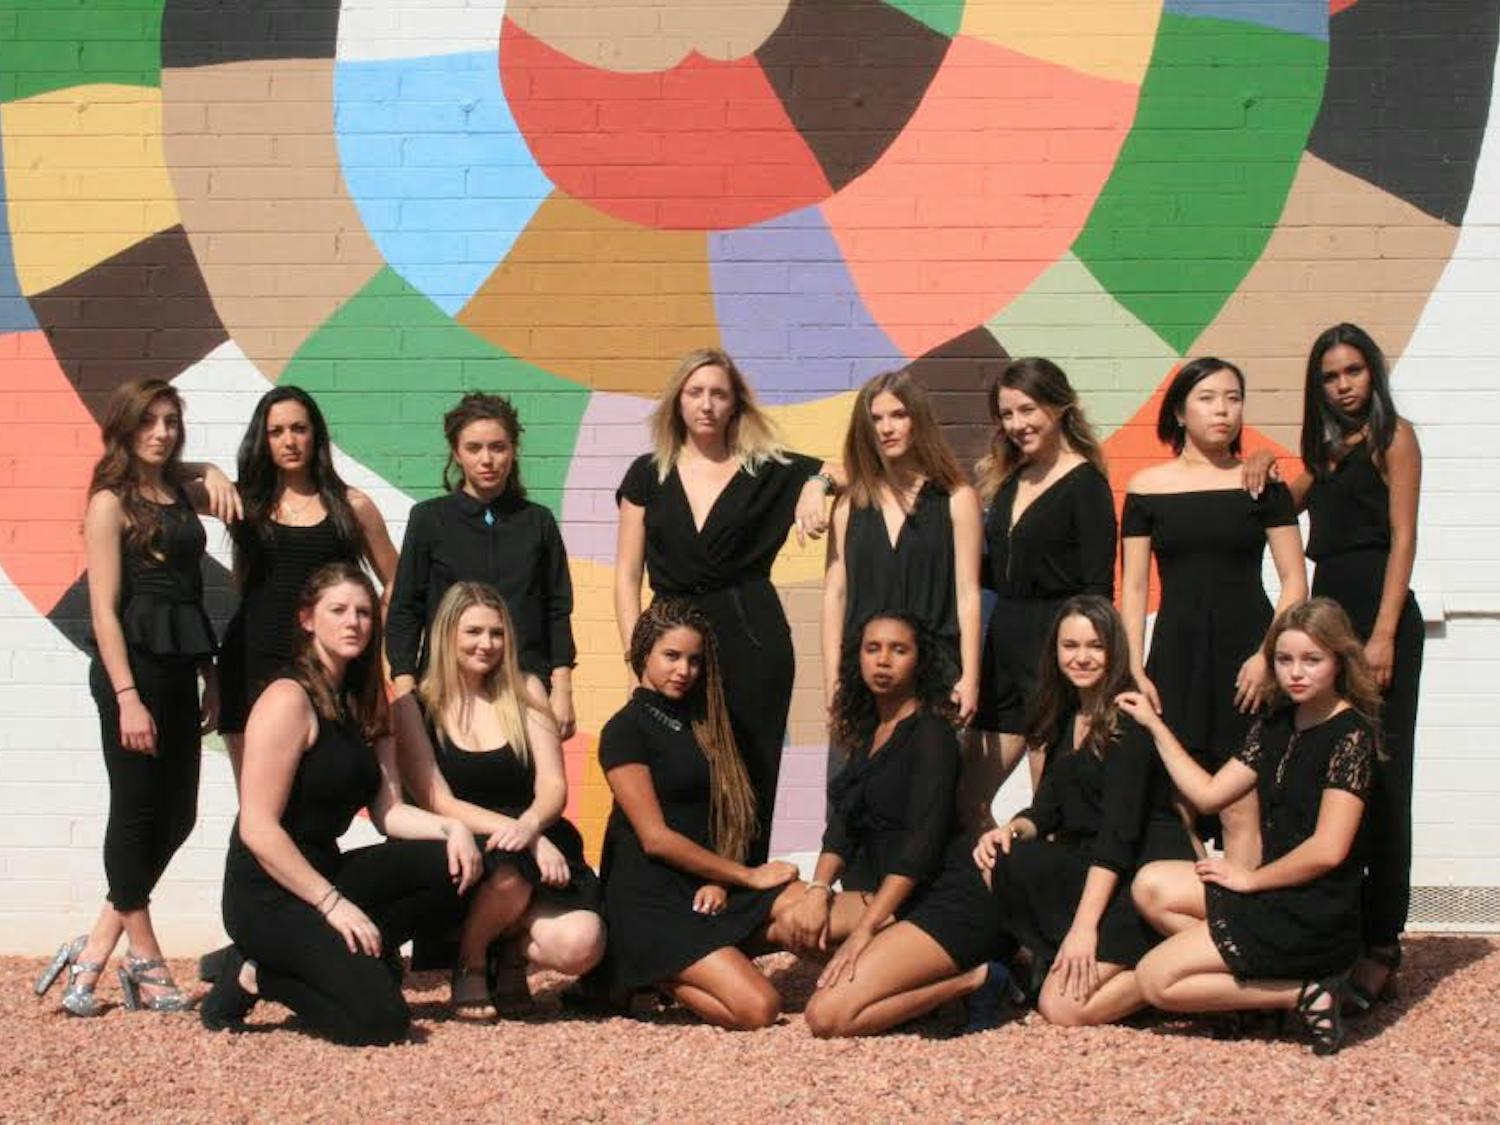 The 2016 all-female a cappella group The Pitchforks pose together for a&nbsp;photoshoot on Oct. 23, 2016. They will be&nbsp;having their fall concert on Nov. 19 in Murdock Hall on ASU's Tempe Campus.